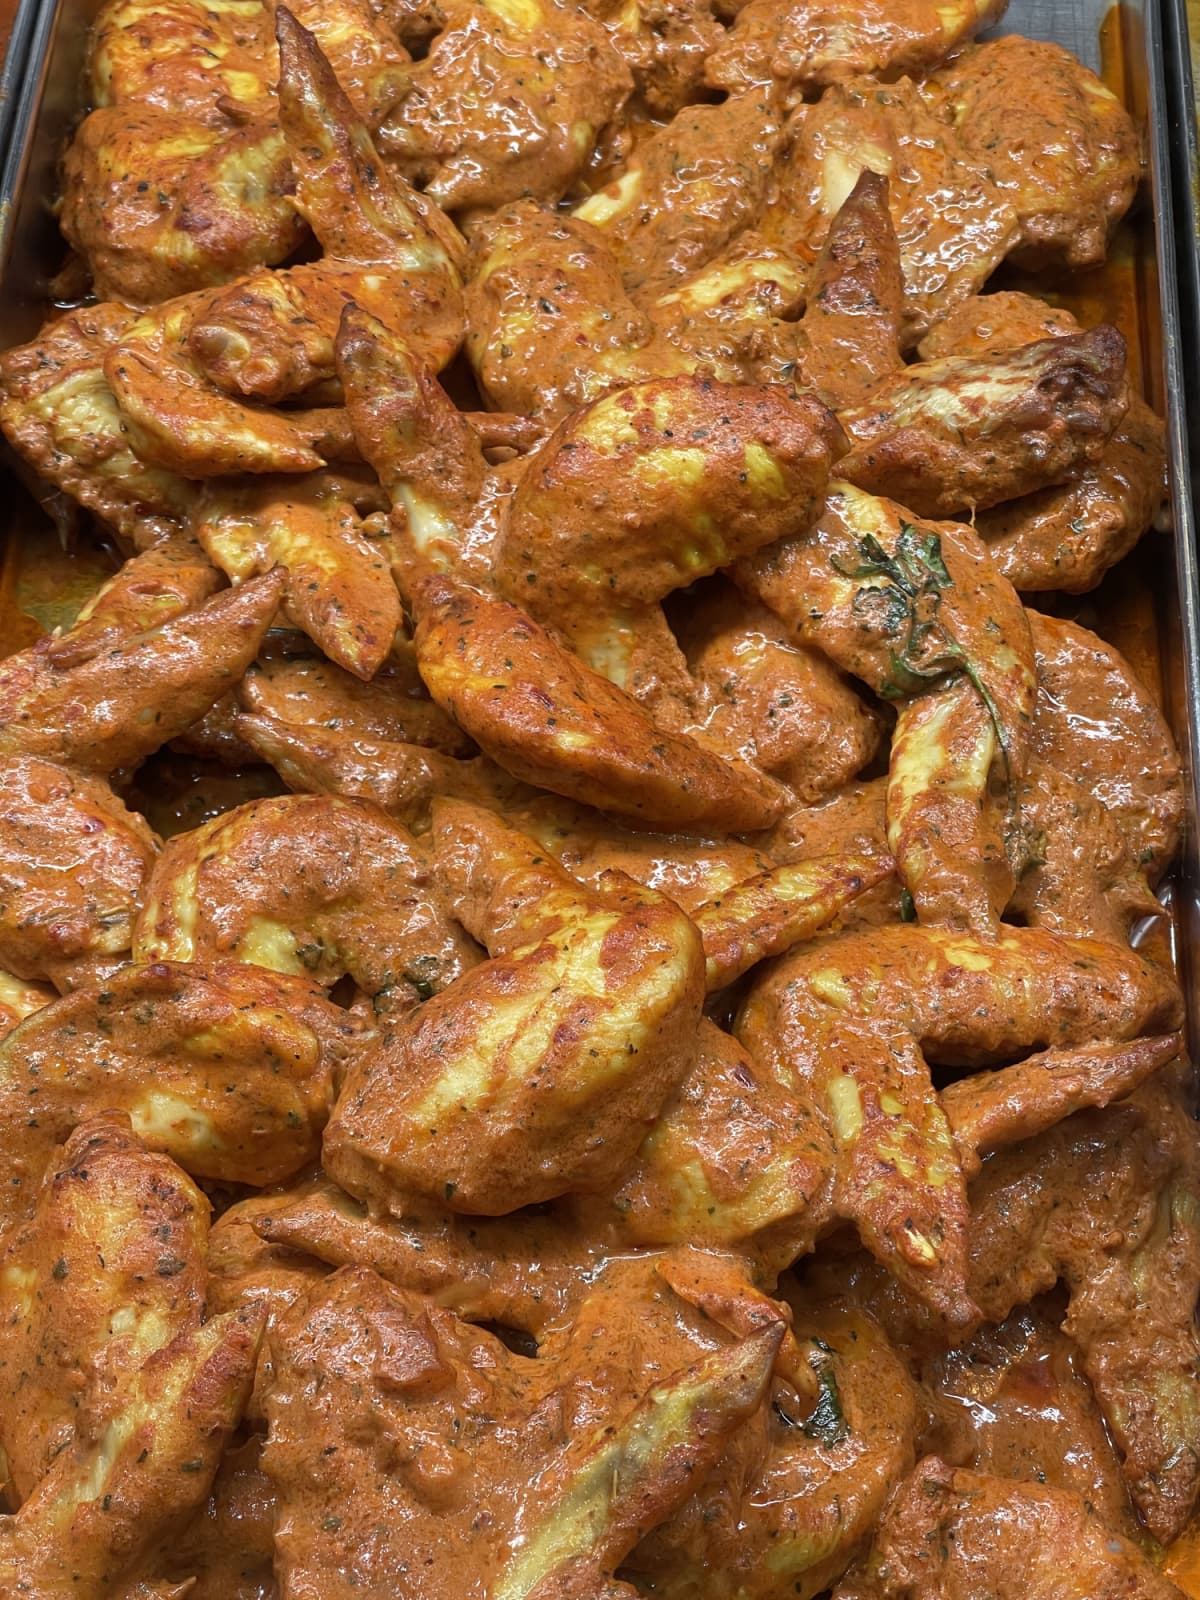 Marinated spicy chicken wings.